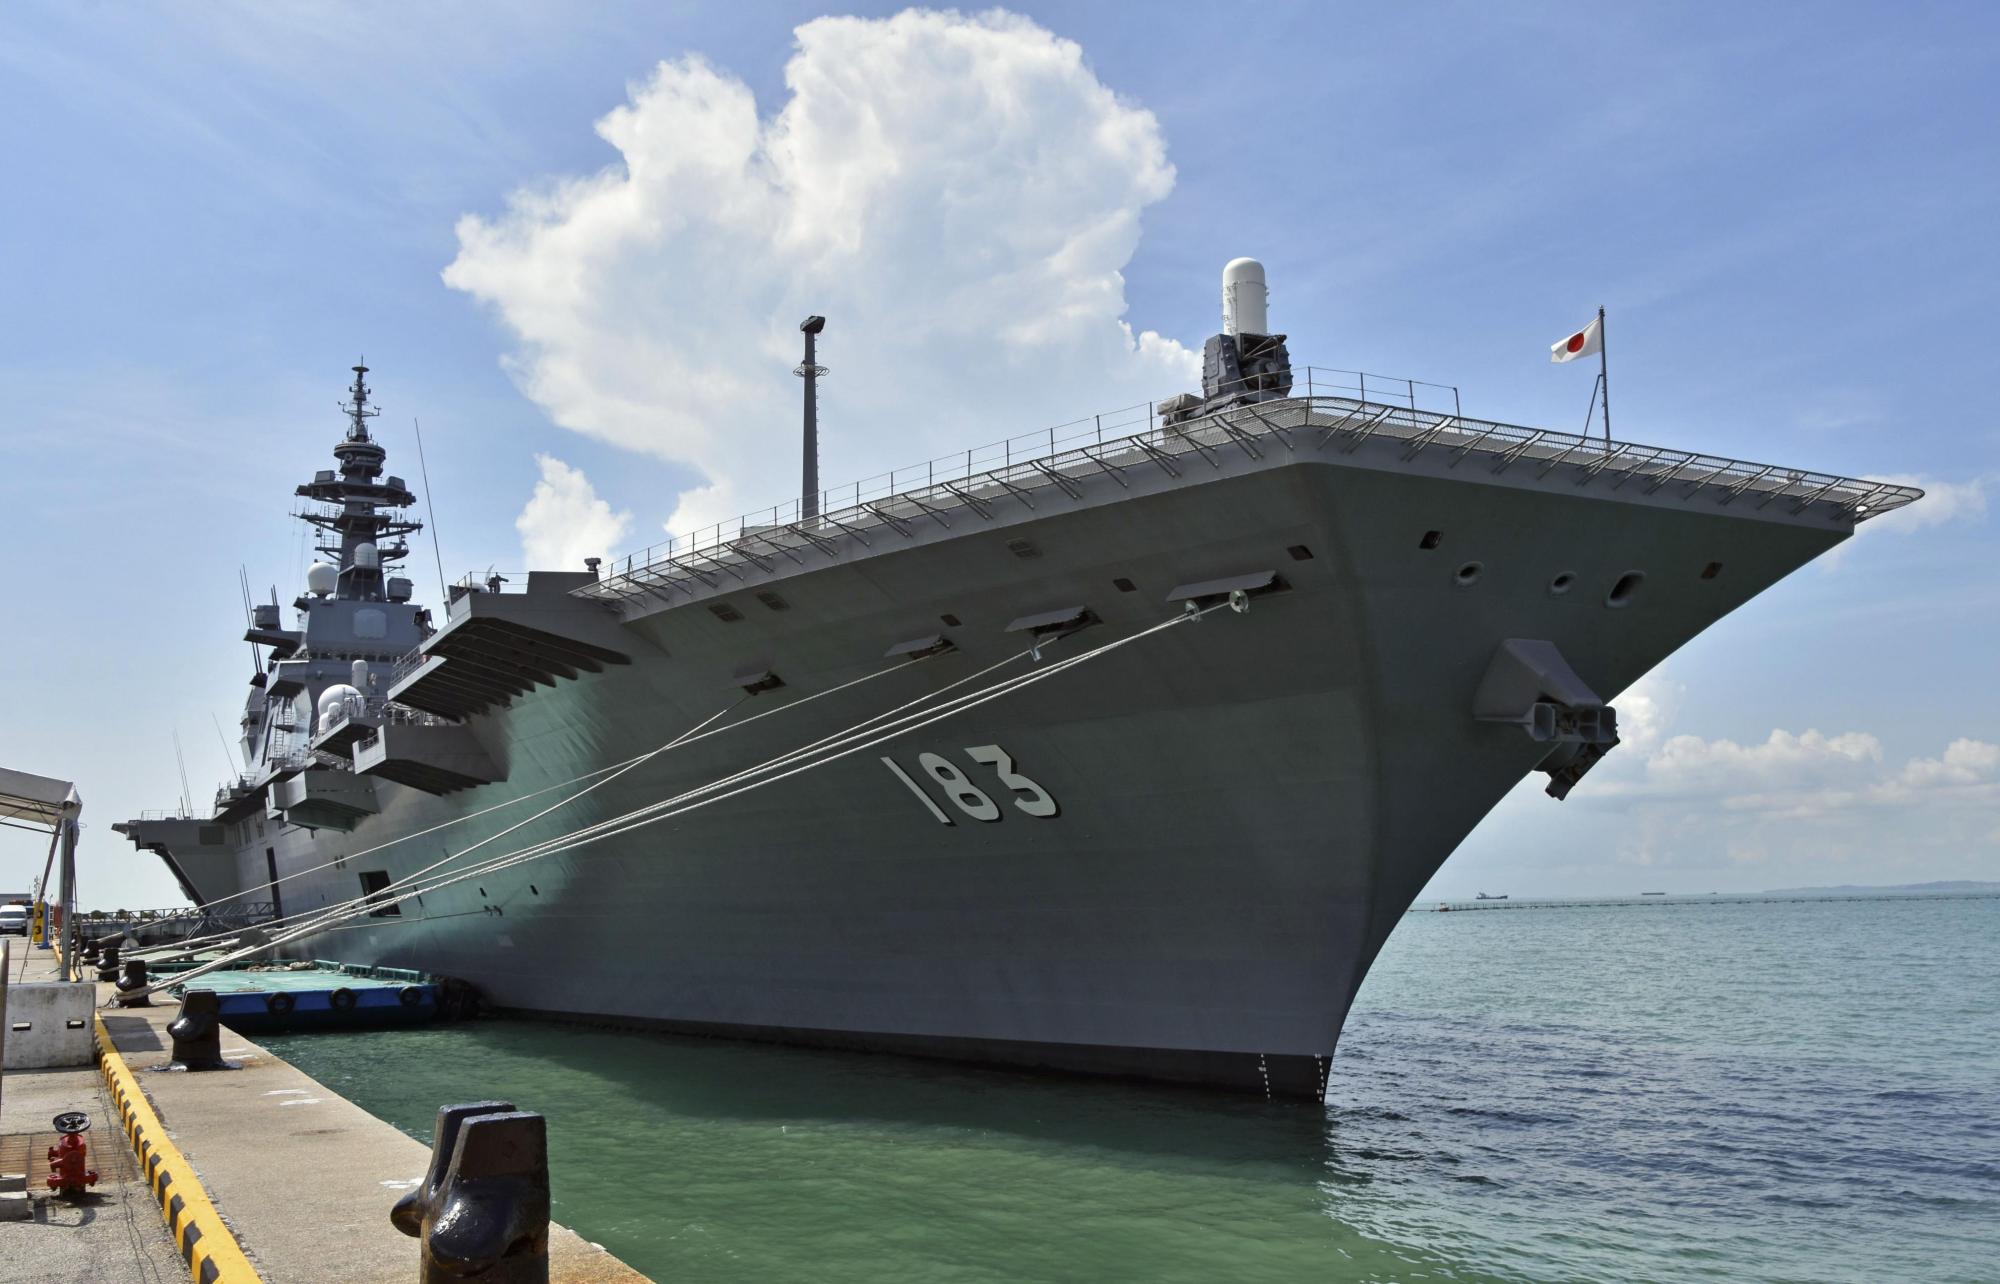 The Maritime Self-Defense Force's helicopter carrier Izumo is anchored at a port in Singapore on May 13 ahead of joint drills with France, Australia and the United States in the Indian Ocean that began Sunday. | KYODO